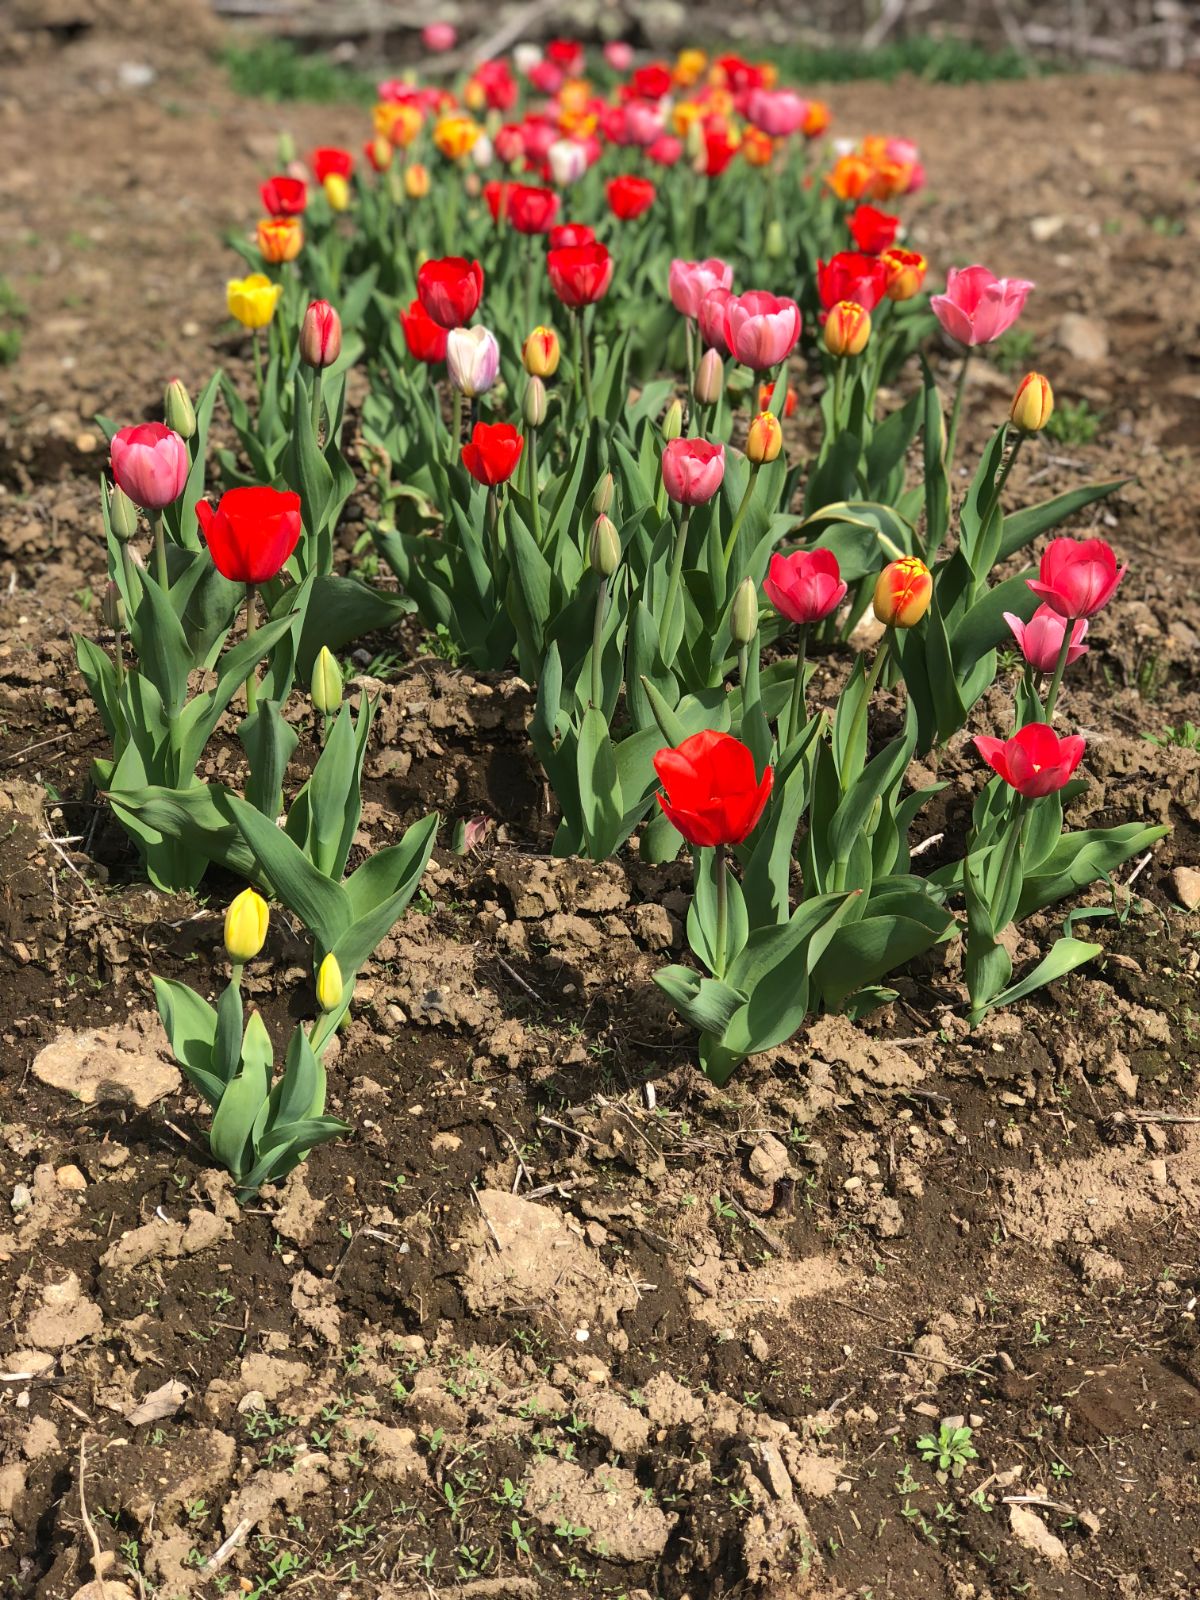 A wide row of spring blooming tulips